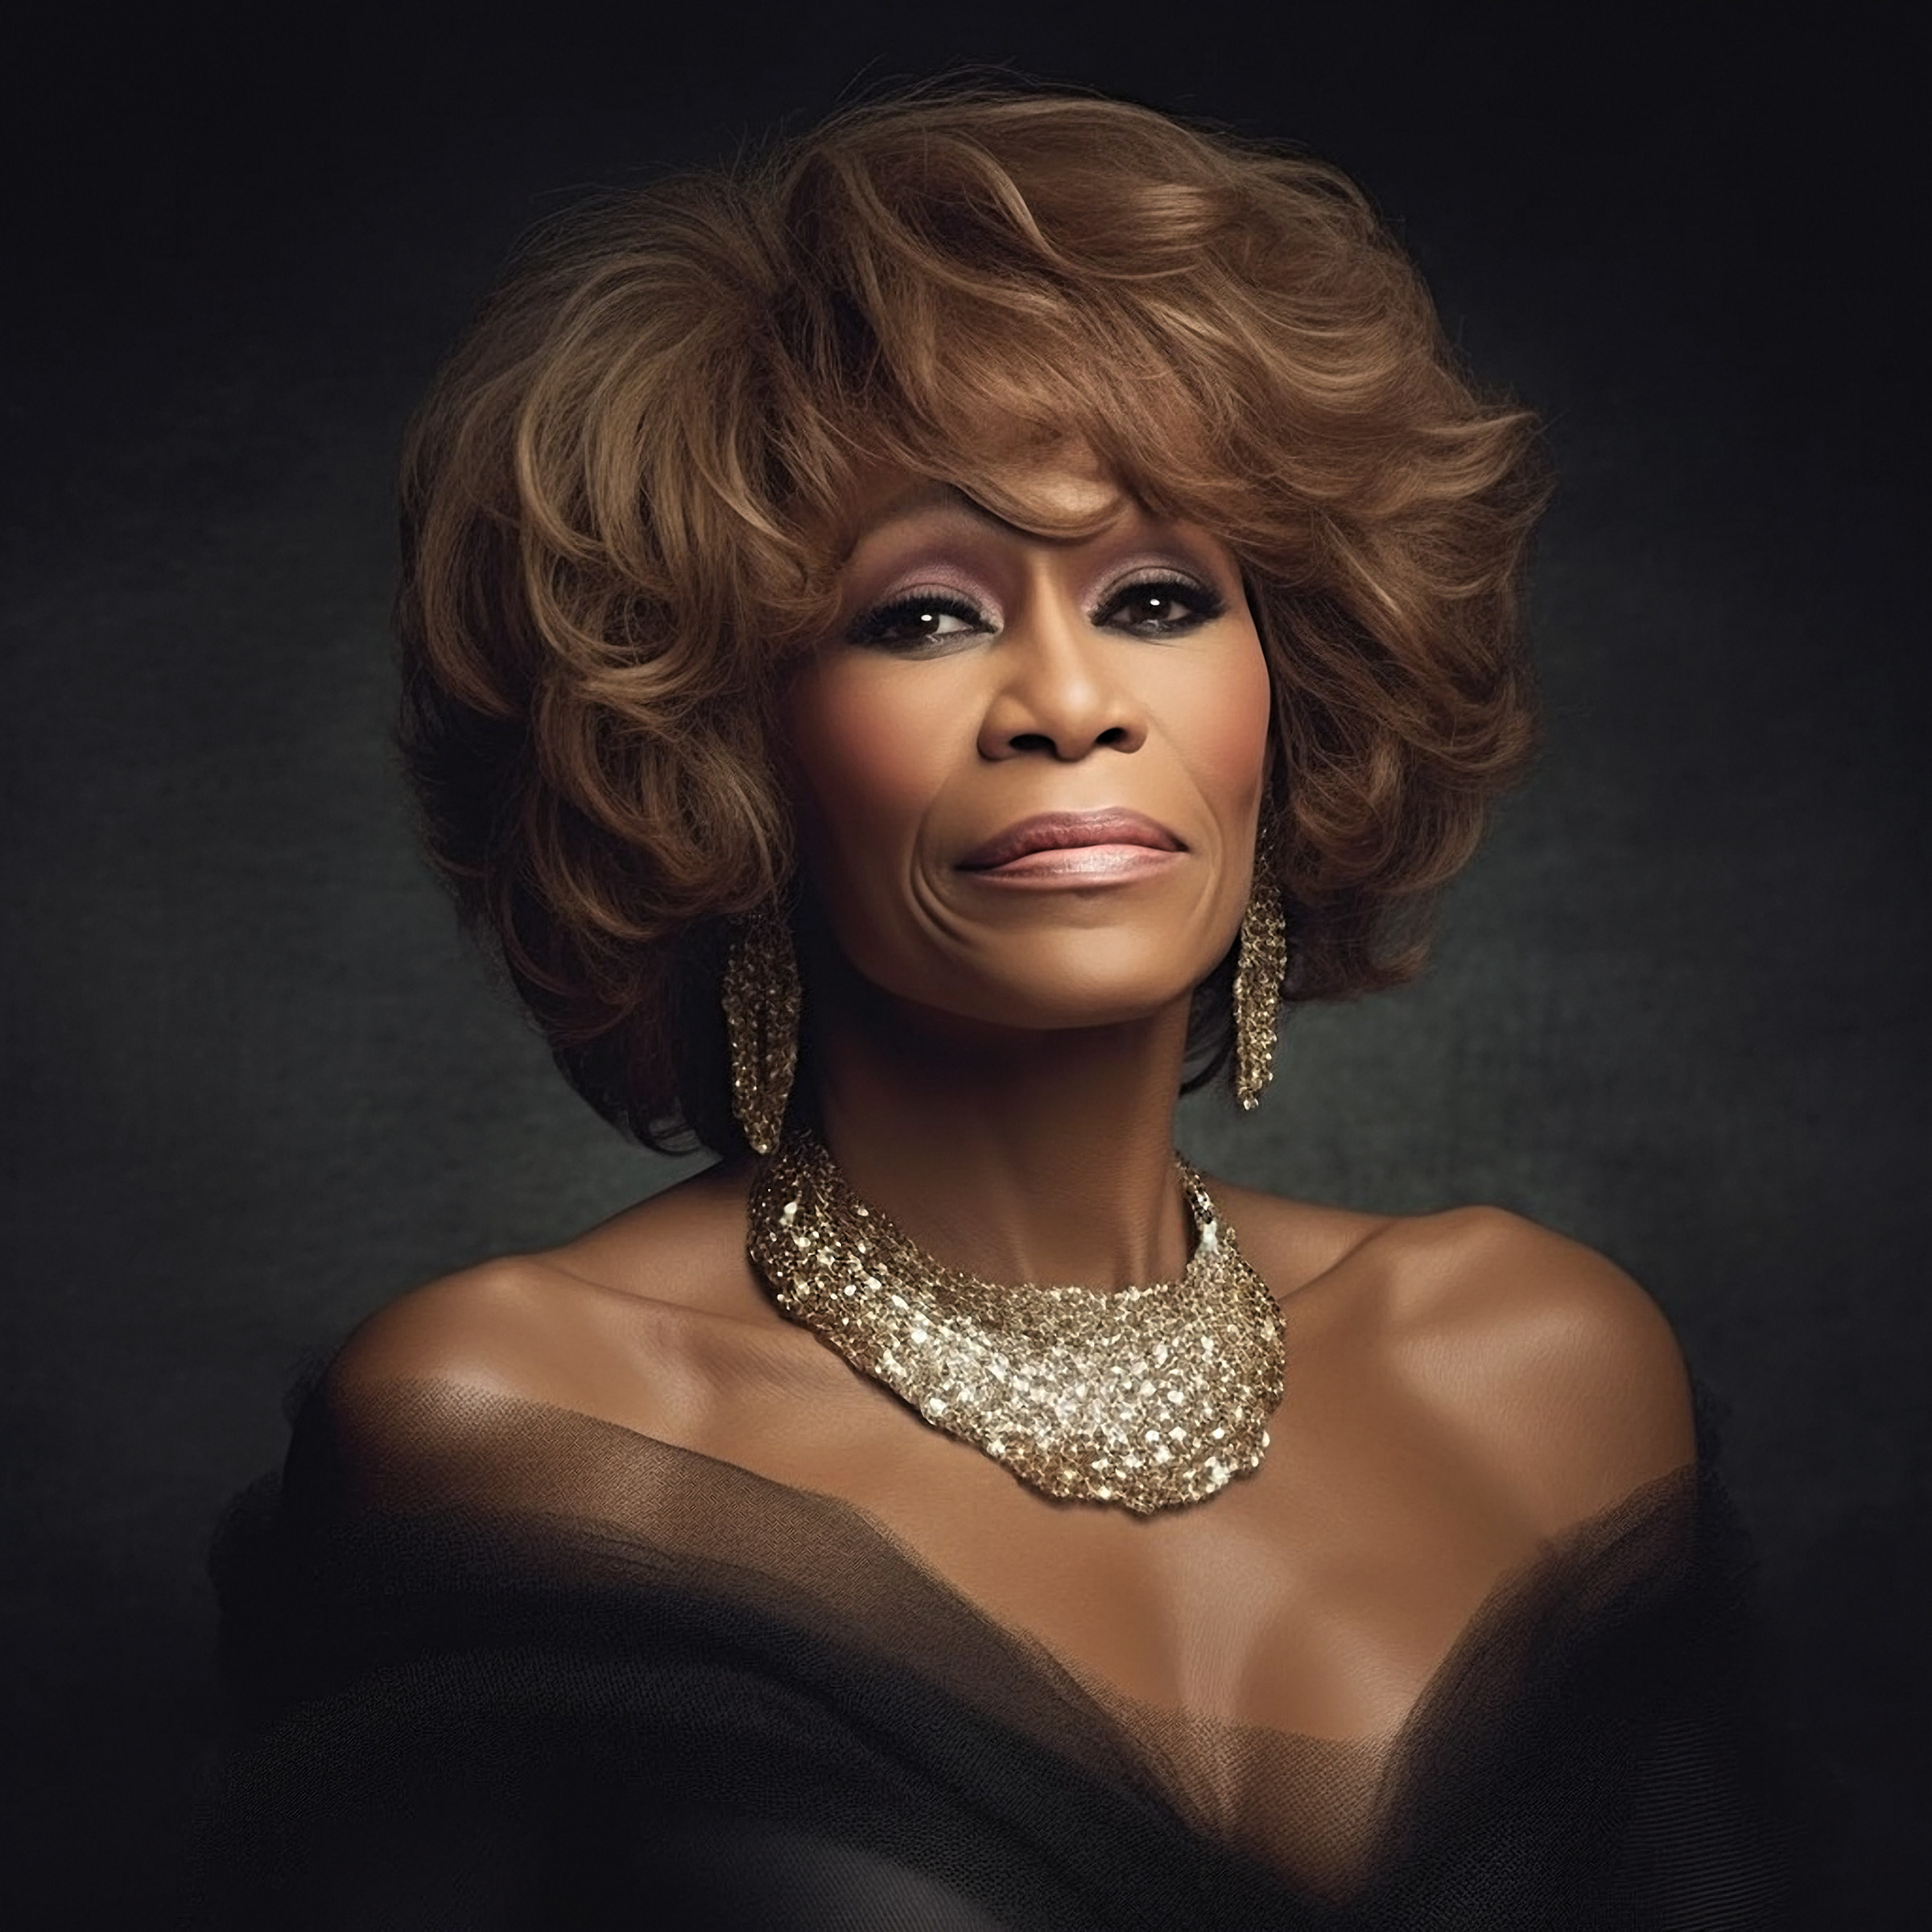 Whitney Houston imagined as an older person